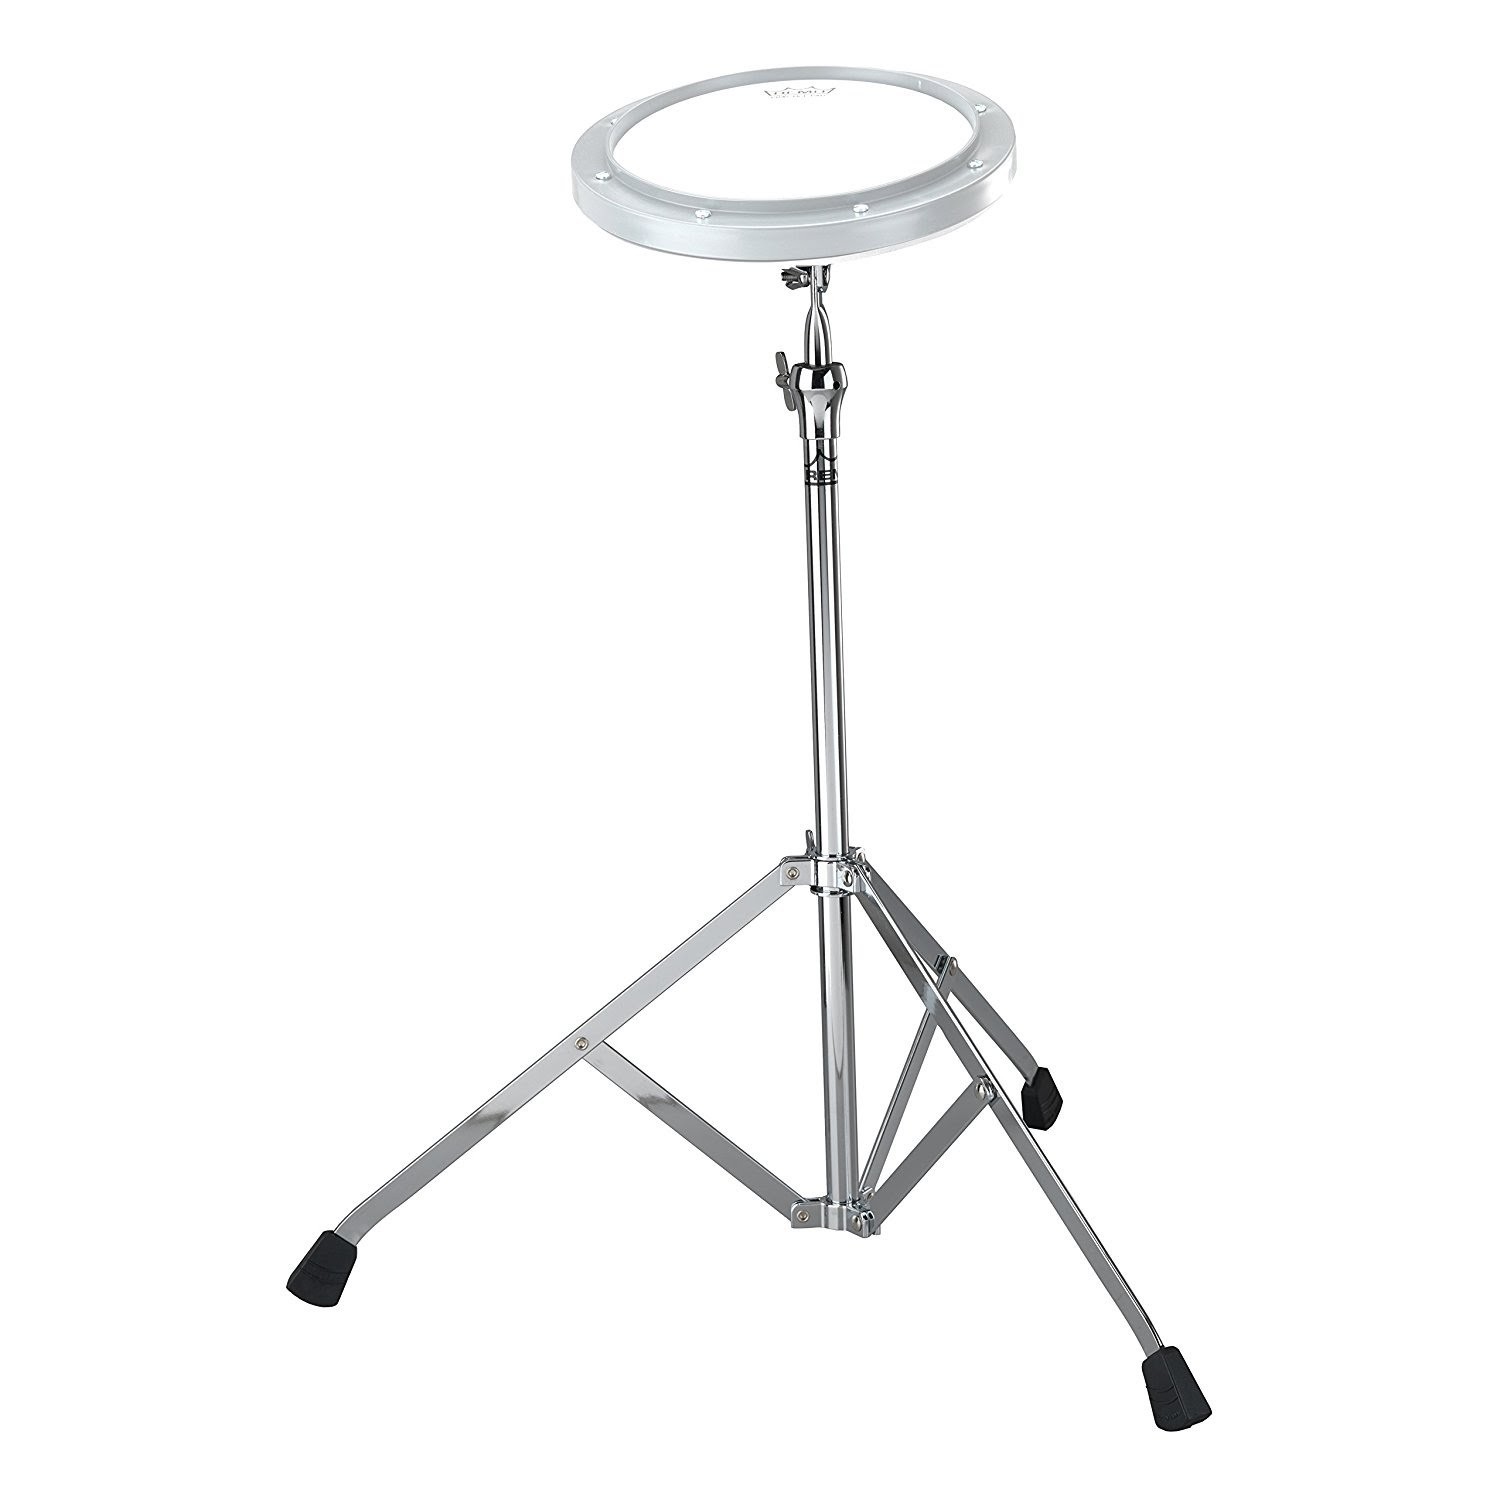 Drum Pad  - Remo with Stand - 442714 153